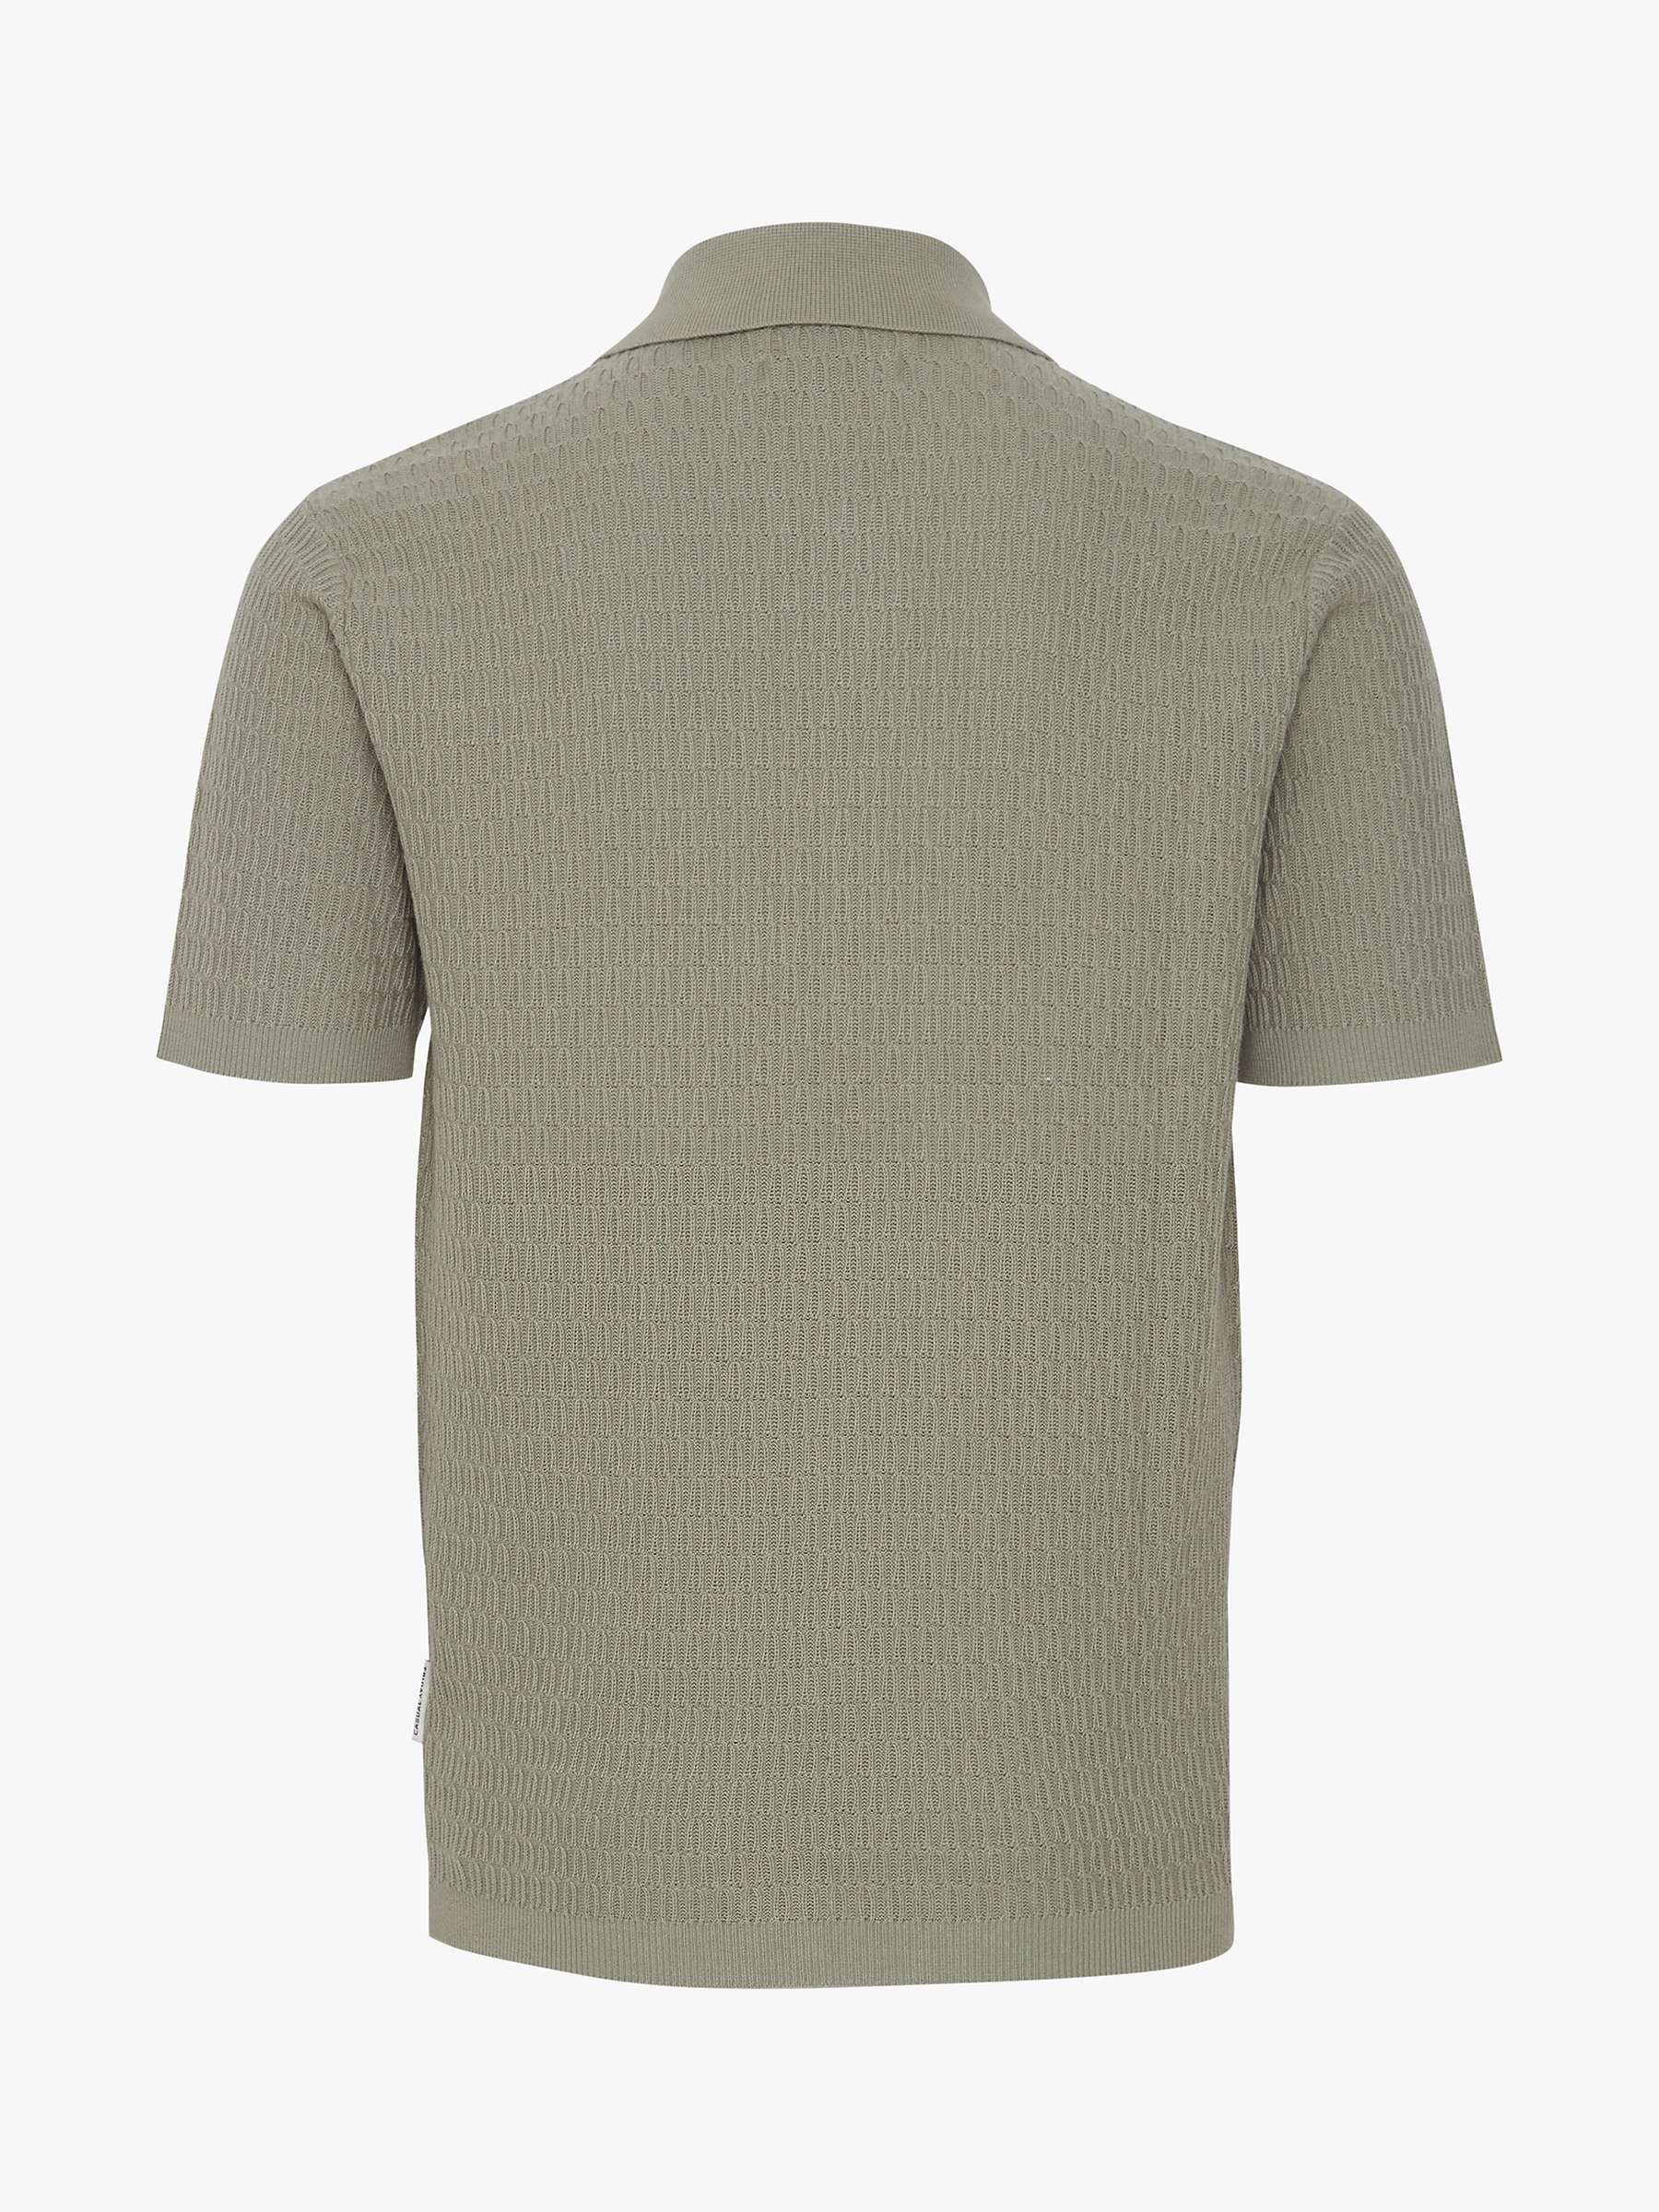 Buy Casual Friday Karl Structured Zip Knit Polo Shirt Online at johnlewis.com